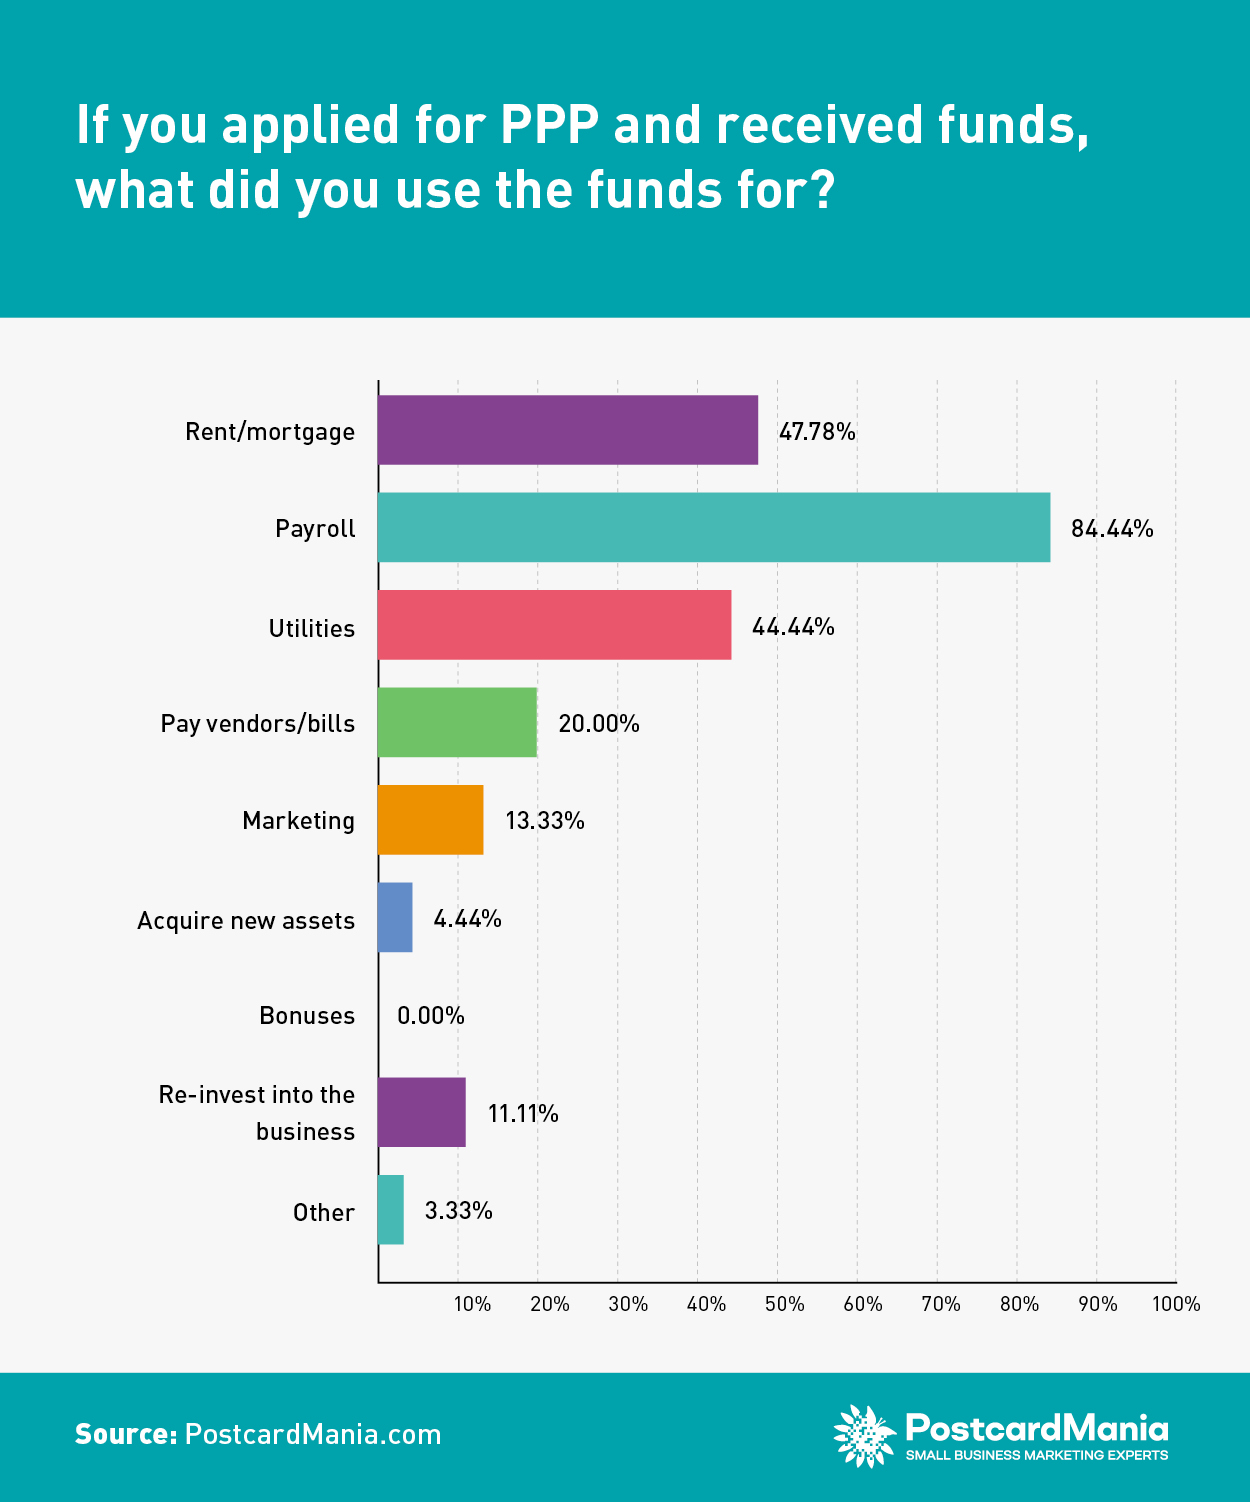 COVID Survey 10 - If you applied for PPP and received funds, what did you use the funds for?